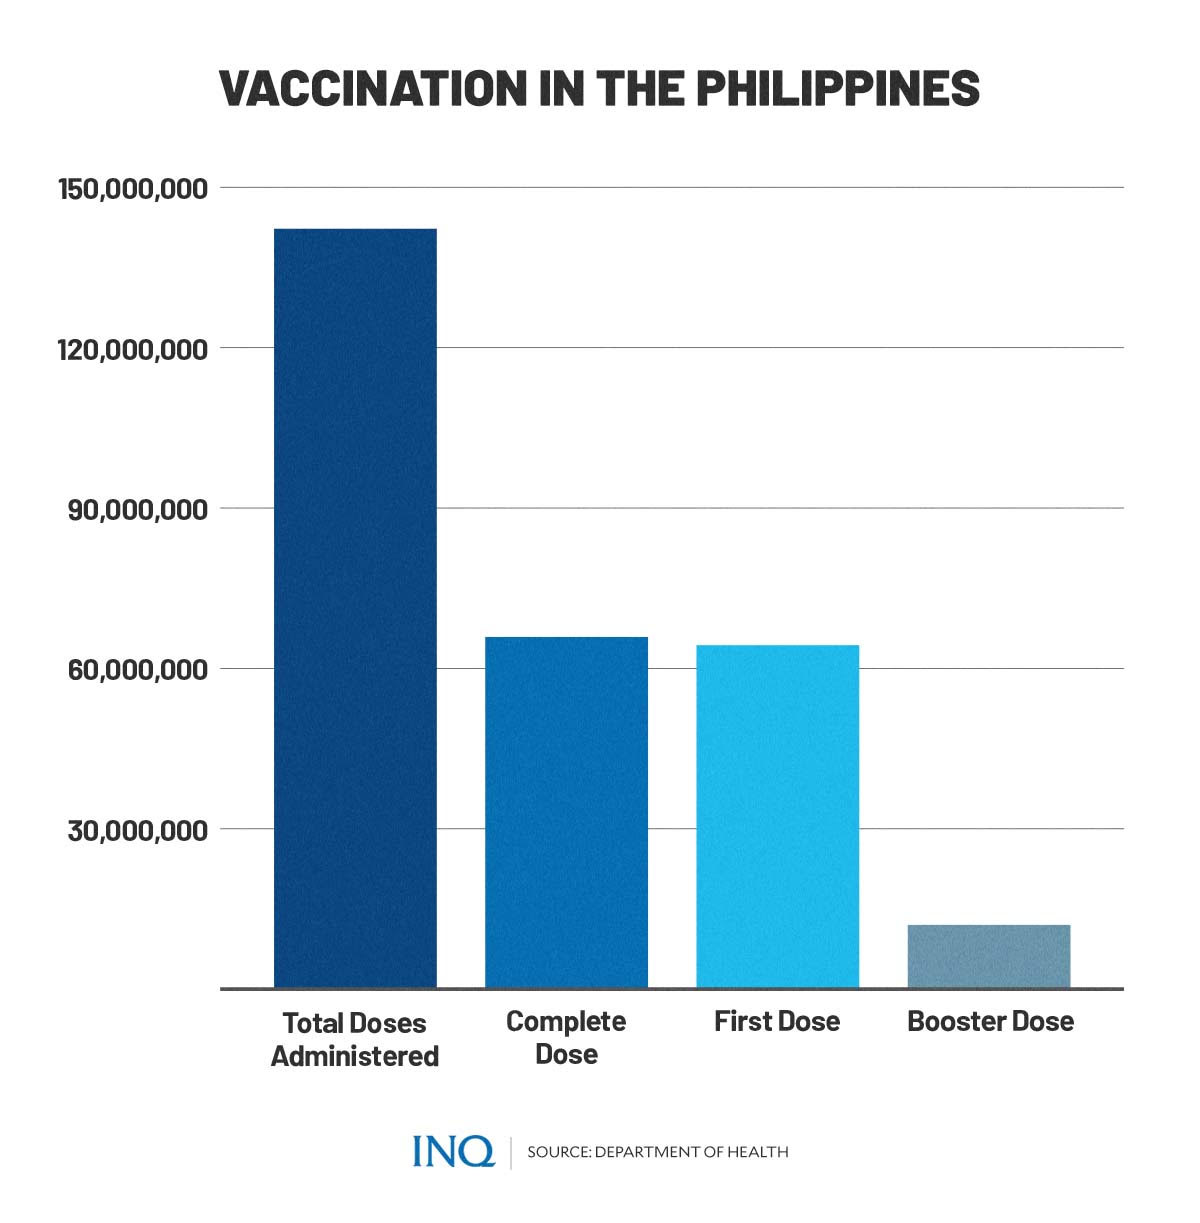 Vaccination in the Philippines